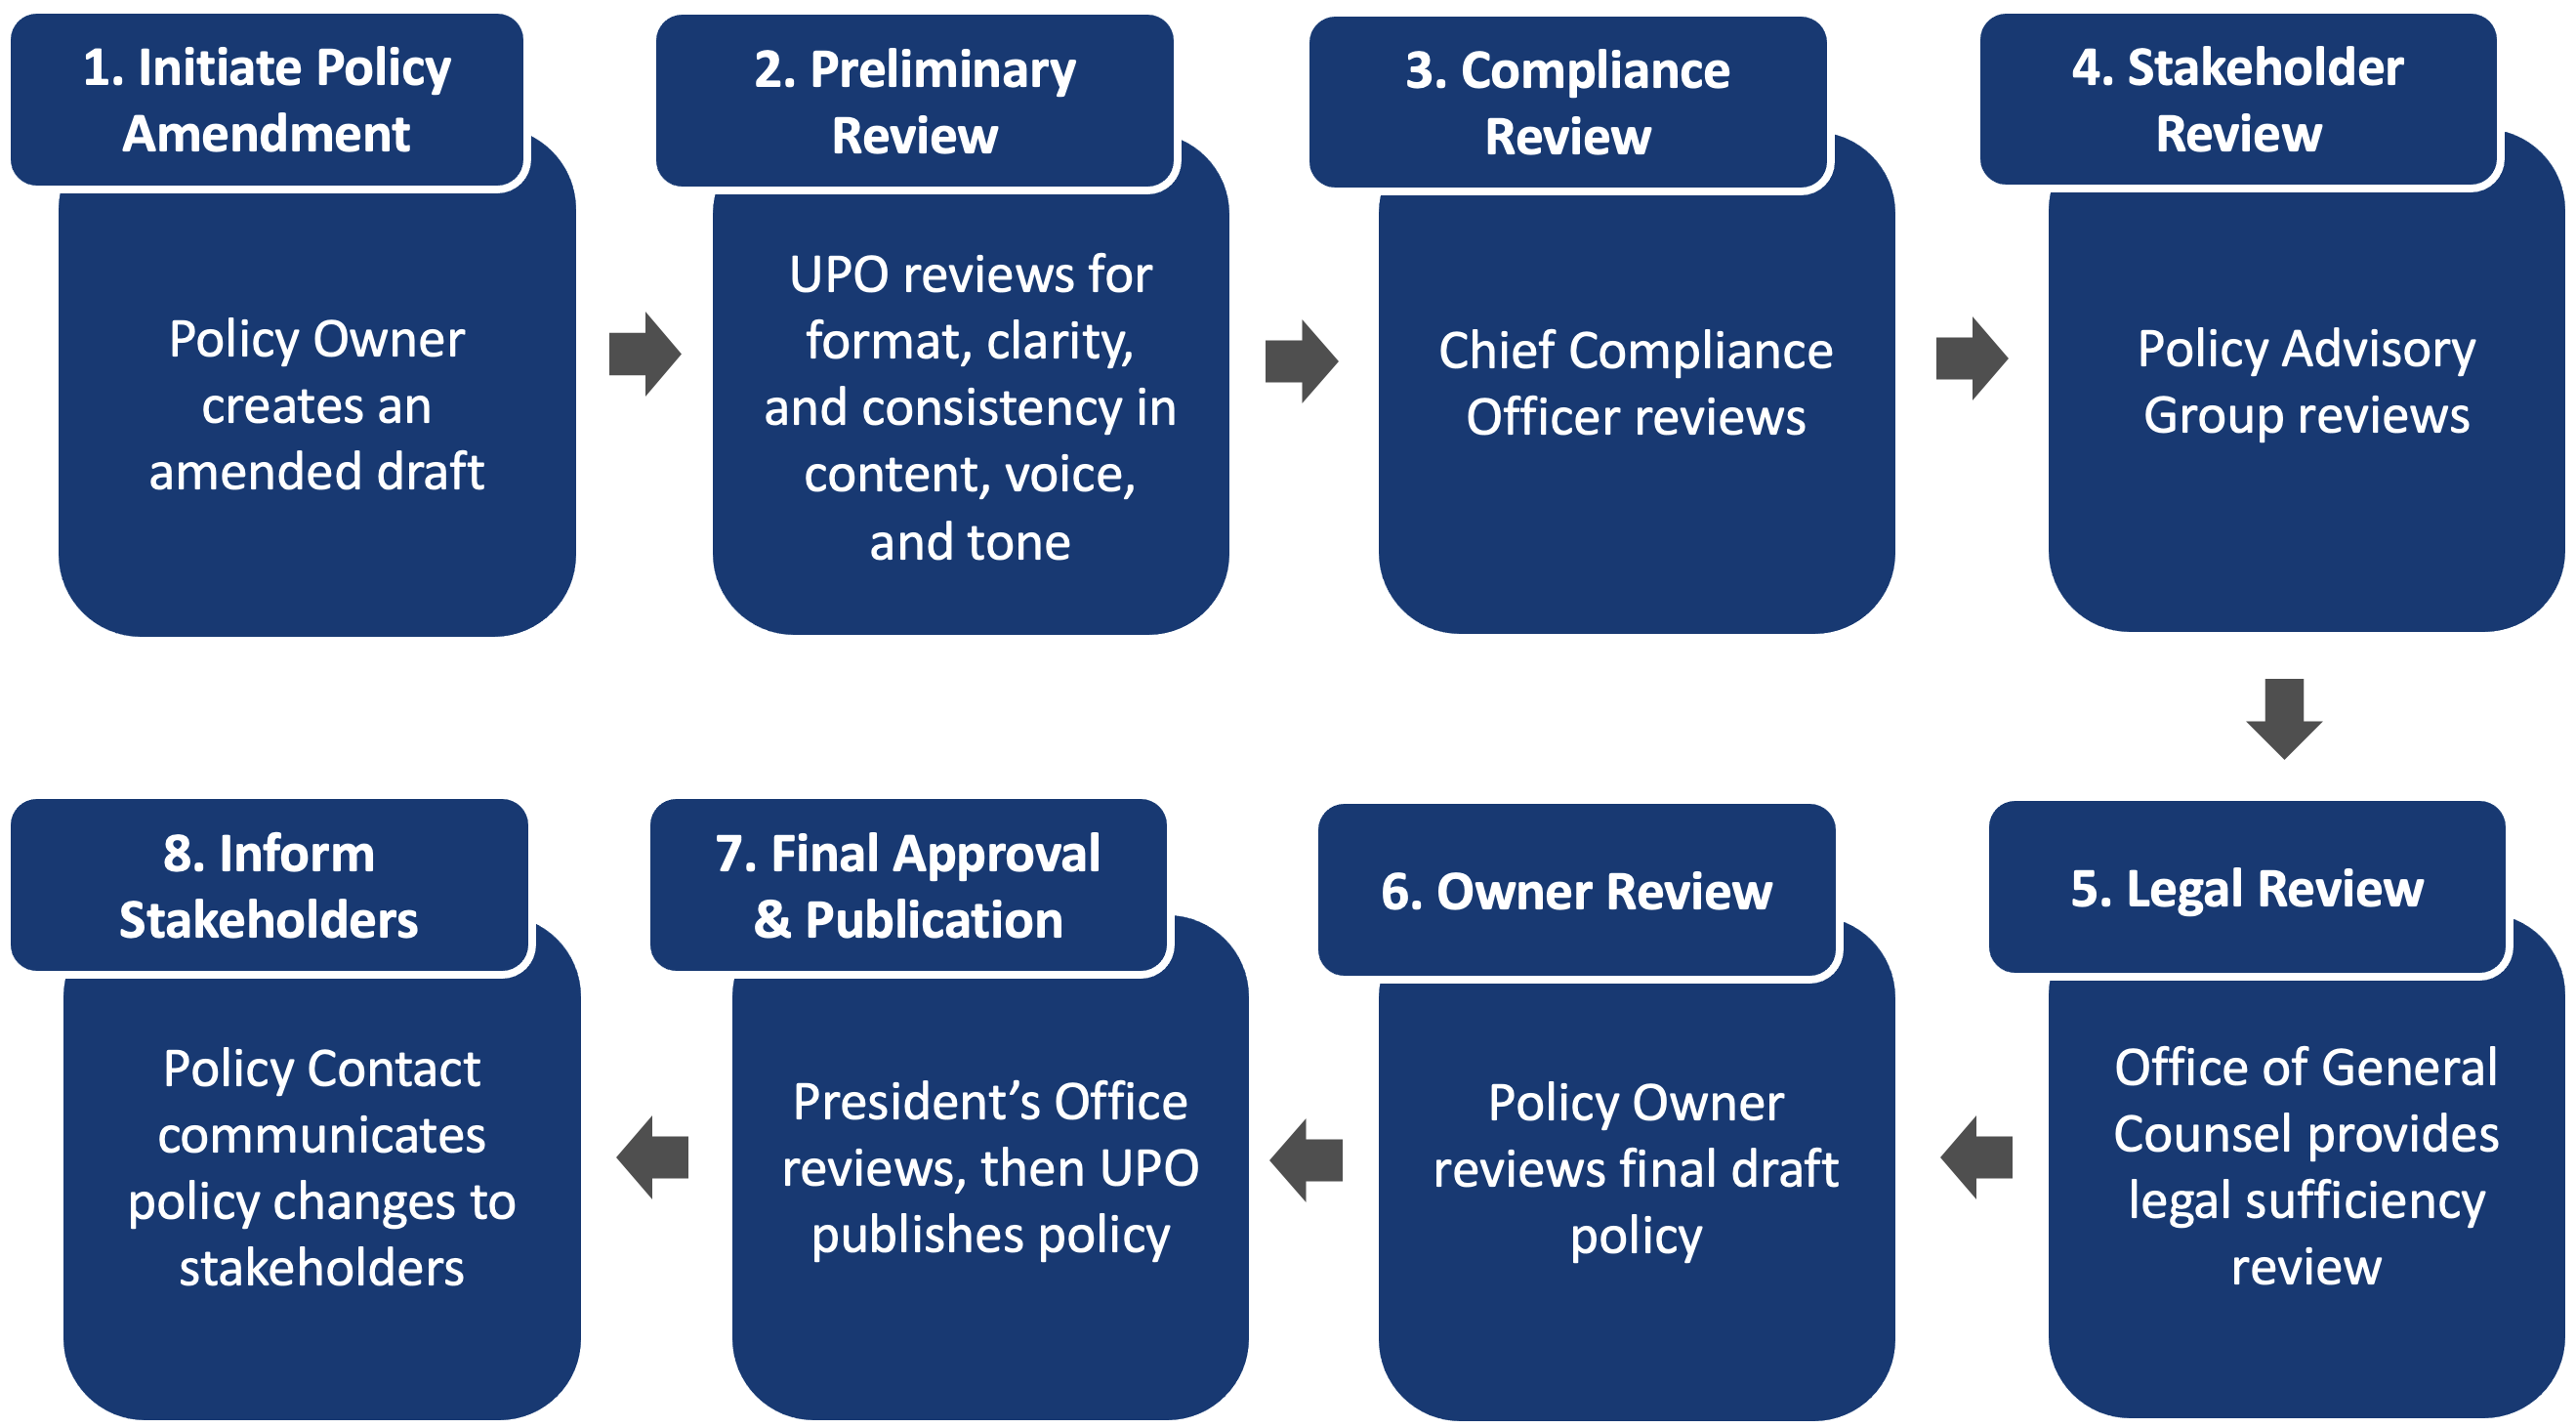 Flow chart displaying the 8 major steps for the policy amendment process.